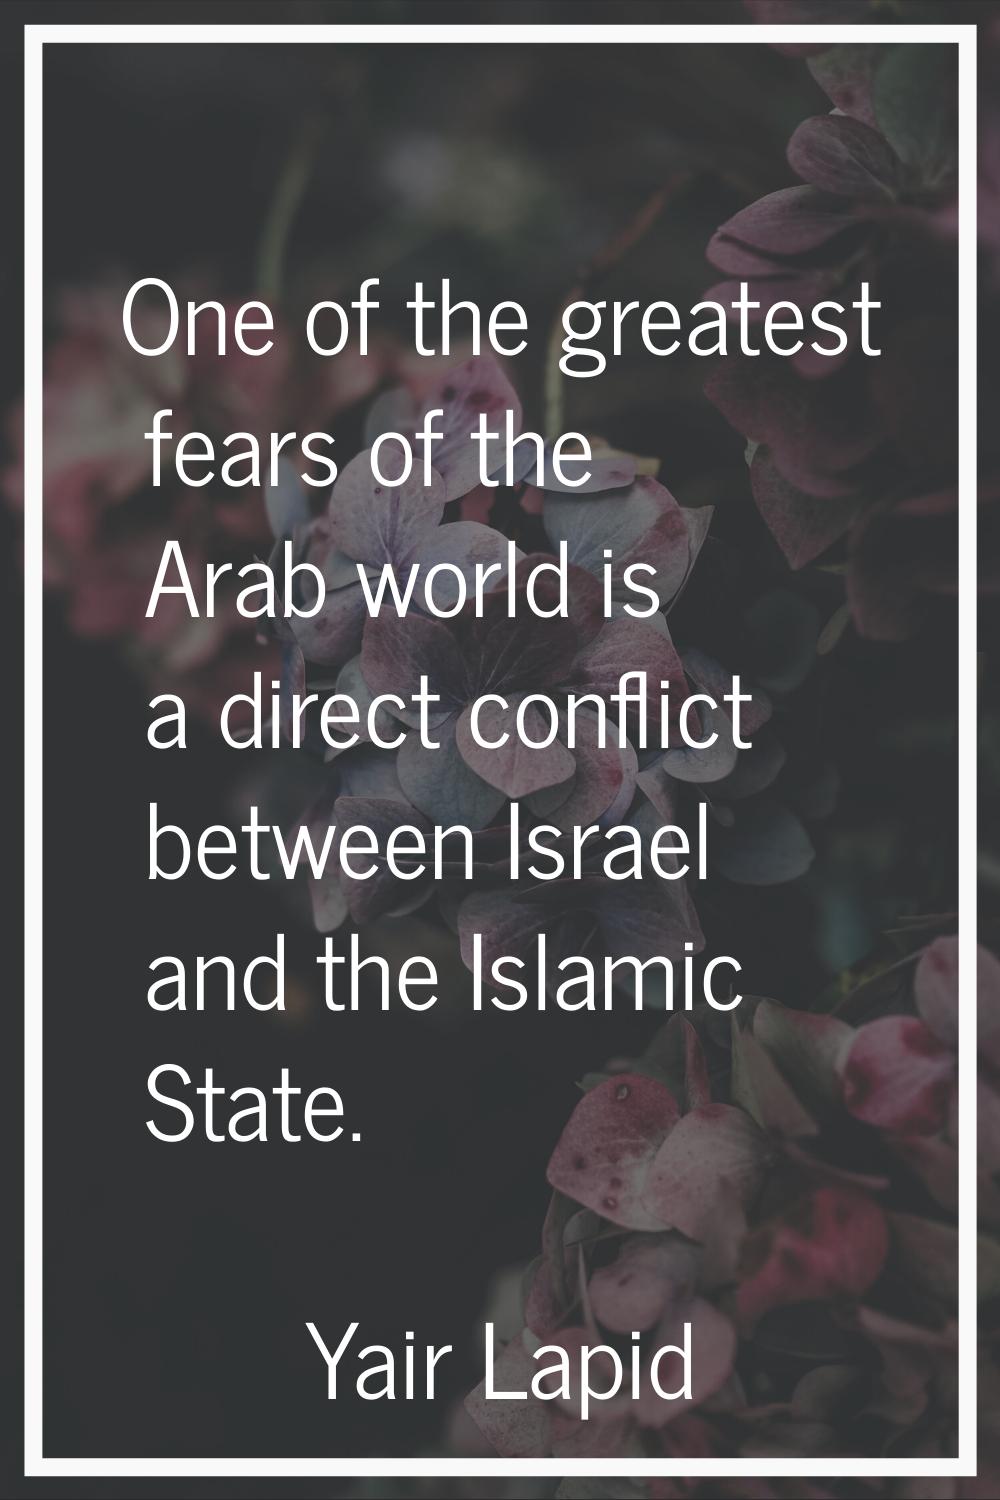 One of the greatest fears of the Arab world is a direct conflict between Israel and the Islamic Sta